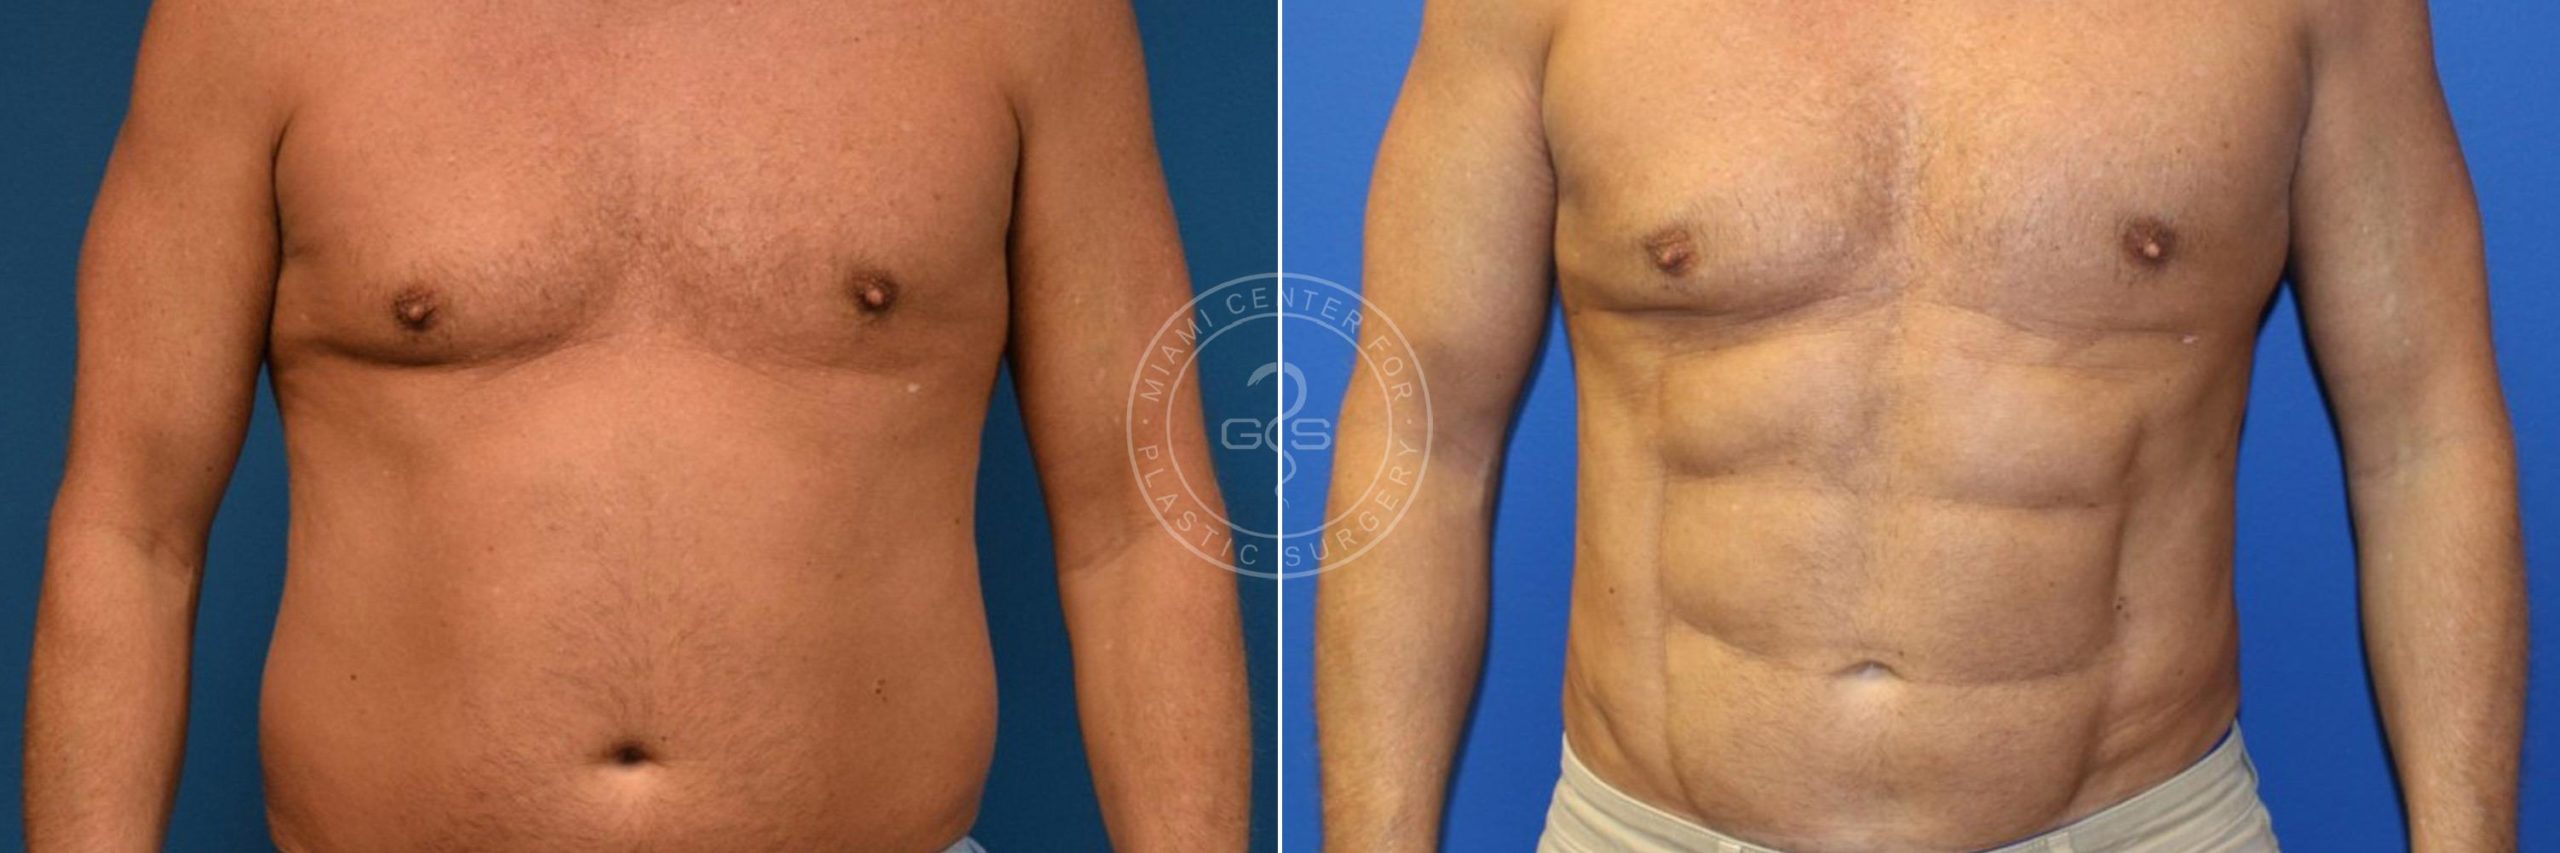 https://miamicenterforplasticsurgery.com/wp-content/uploads/2020/01/patient-3131-liposculpting-abdominal-etching-before-after-scaled.jpg